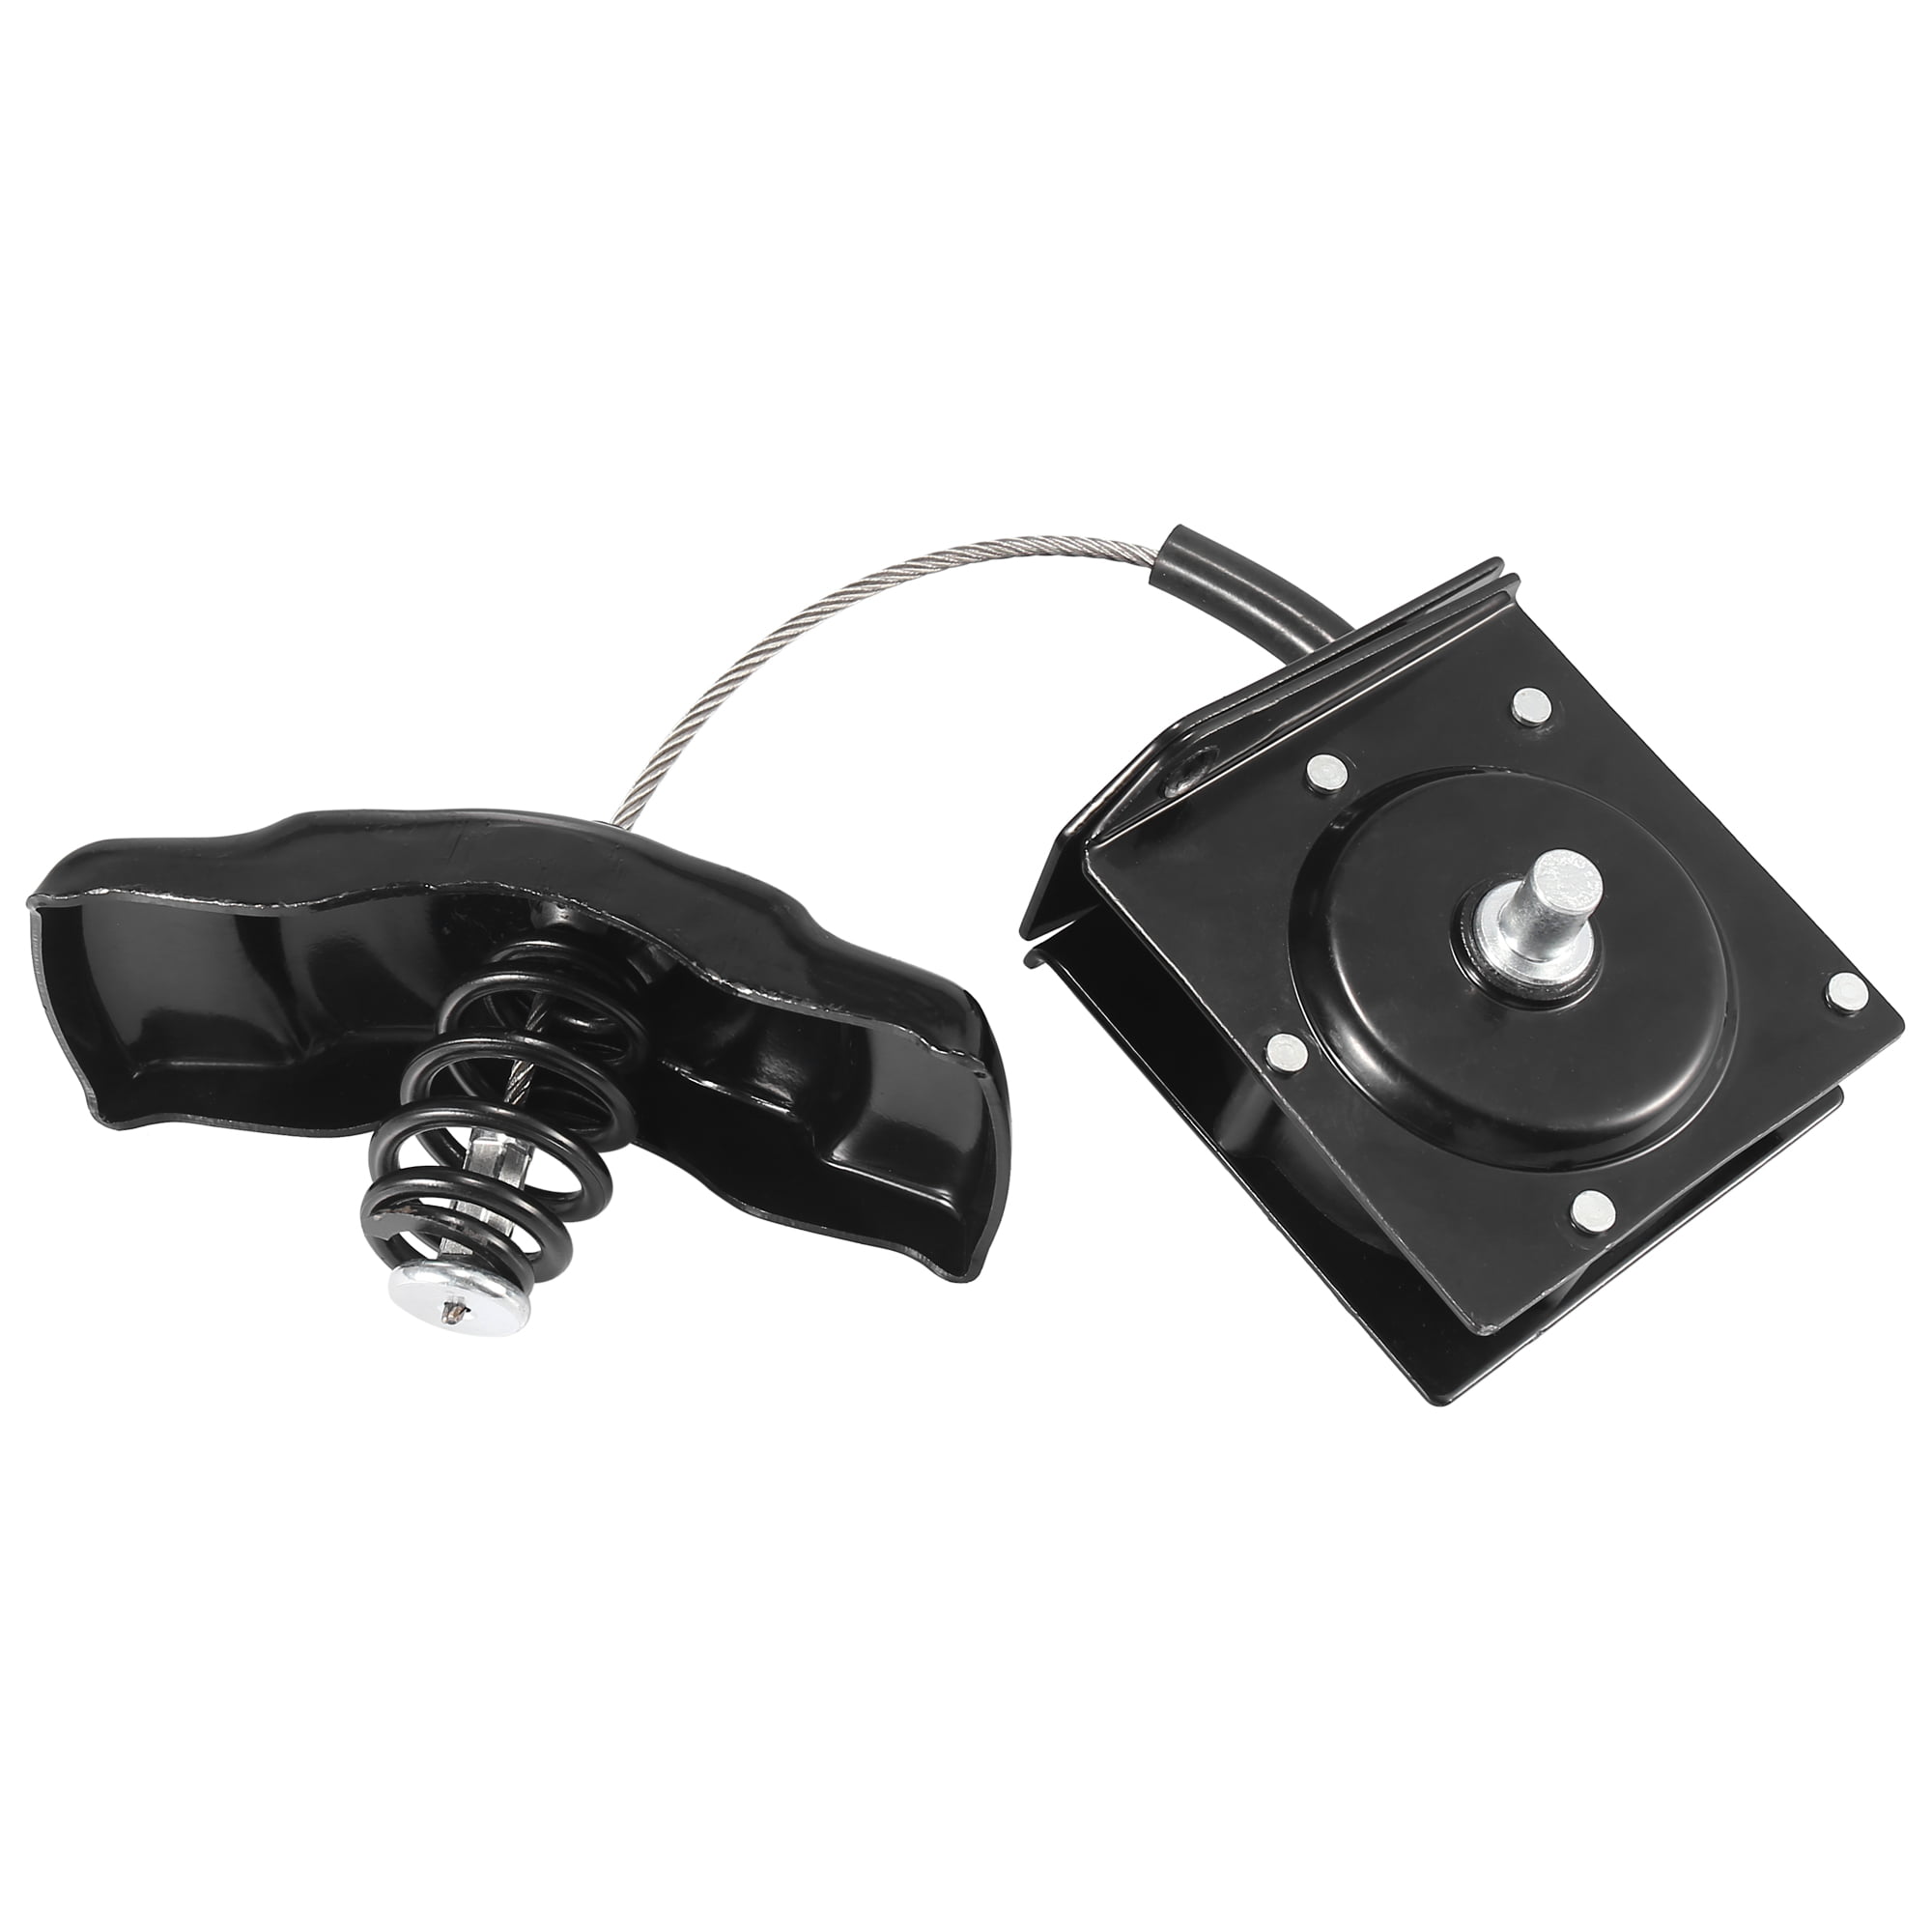 JSD 52058707 Spare Tire Hoist for Dodge Ram 1500 Spare Tire Winch for Dodge Ram 2500 3500 1994-2002